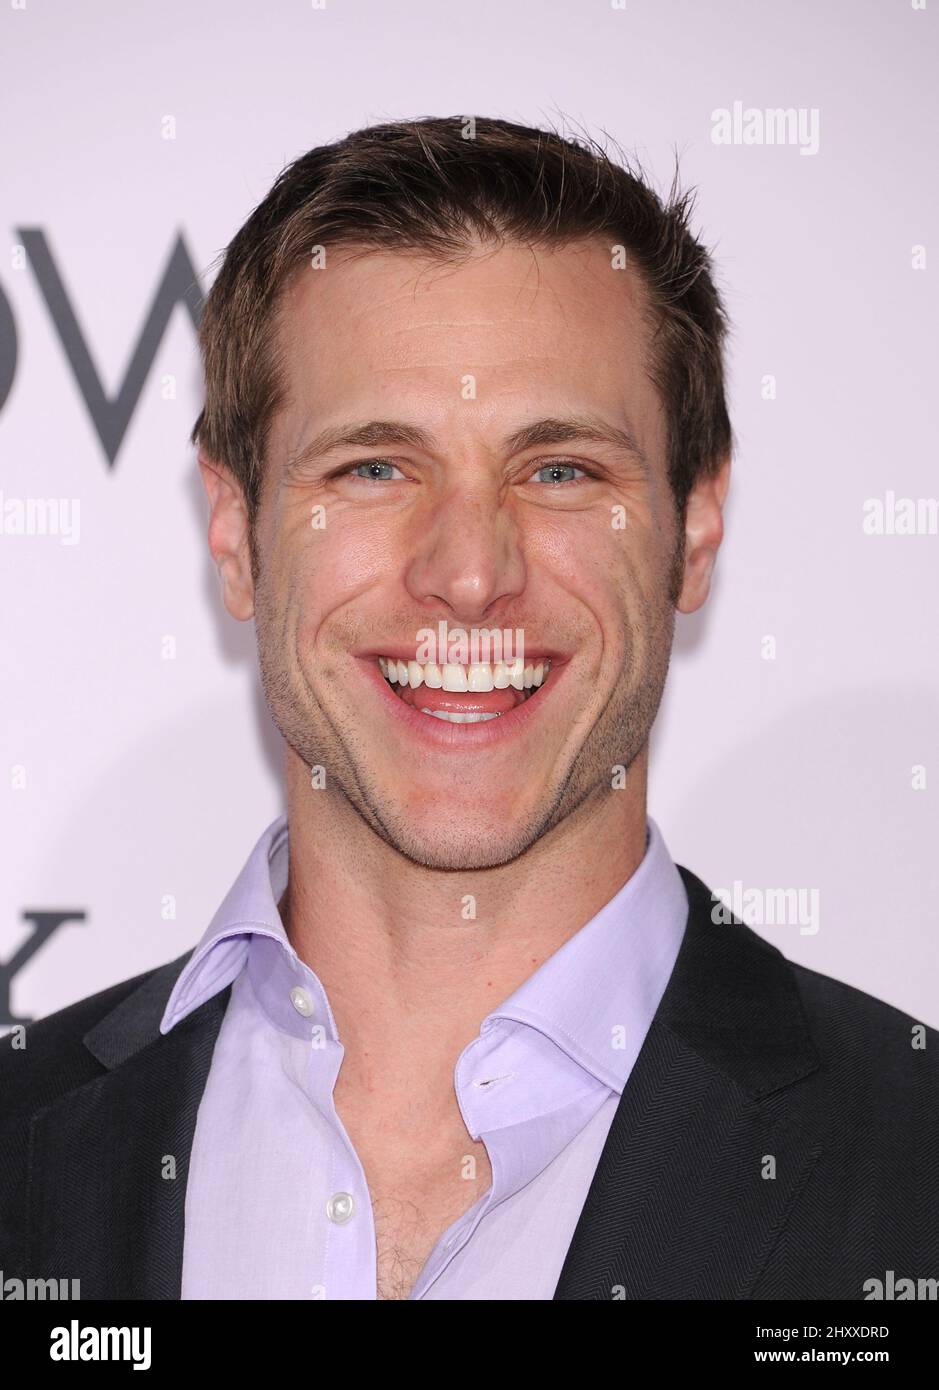 Jake Pavelka during 'The Vow' World Premiere held at Grauman's Chinese Theatre, Hollywood, California Stock Photo